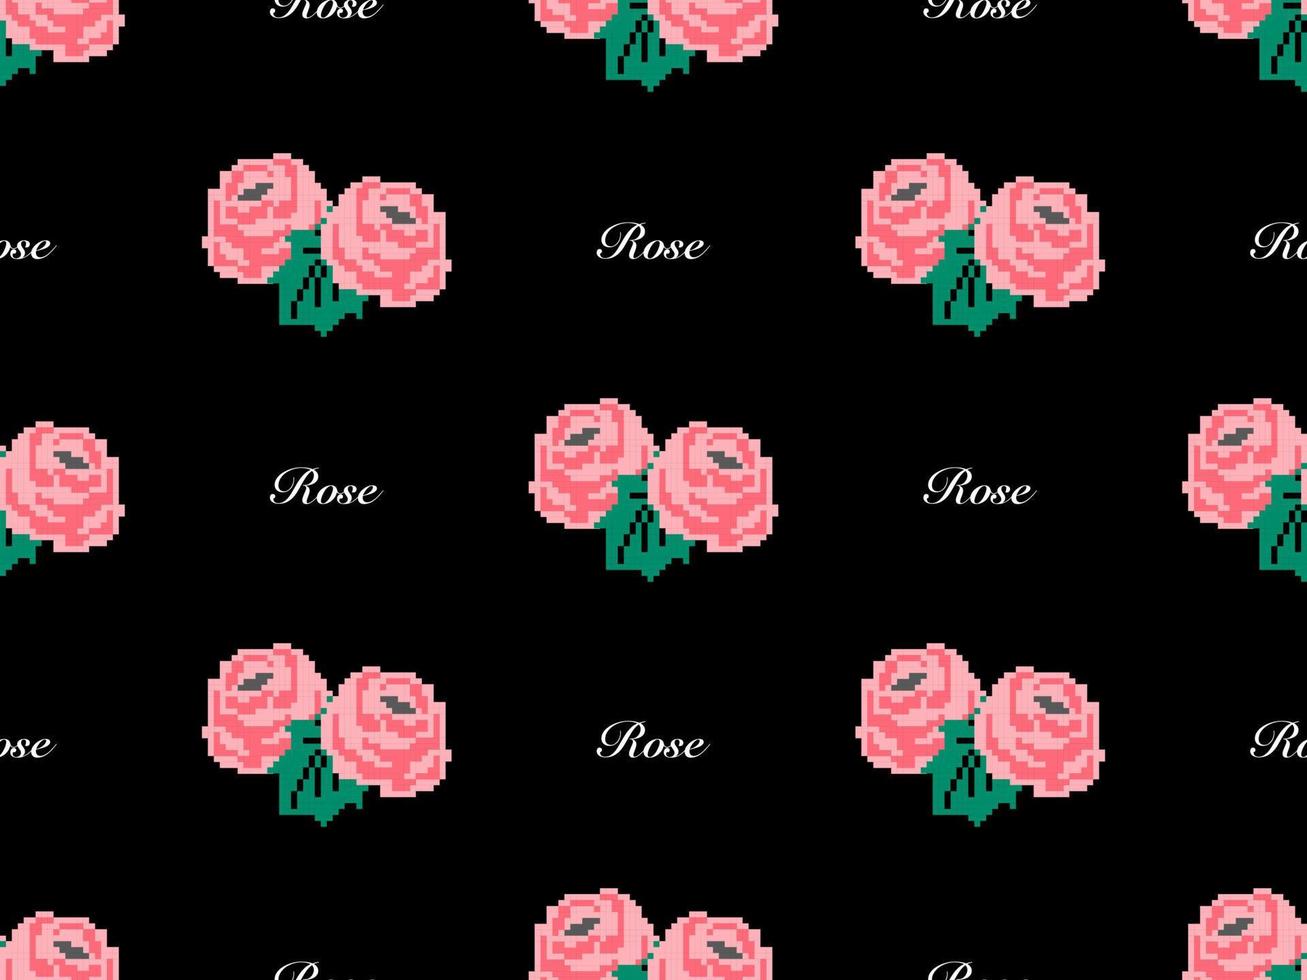 Rose cartoon character seamless pattern on black background. Pixel style vector